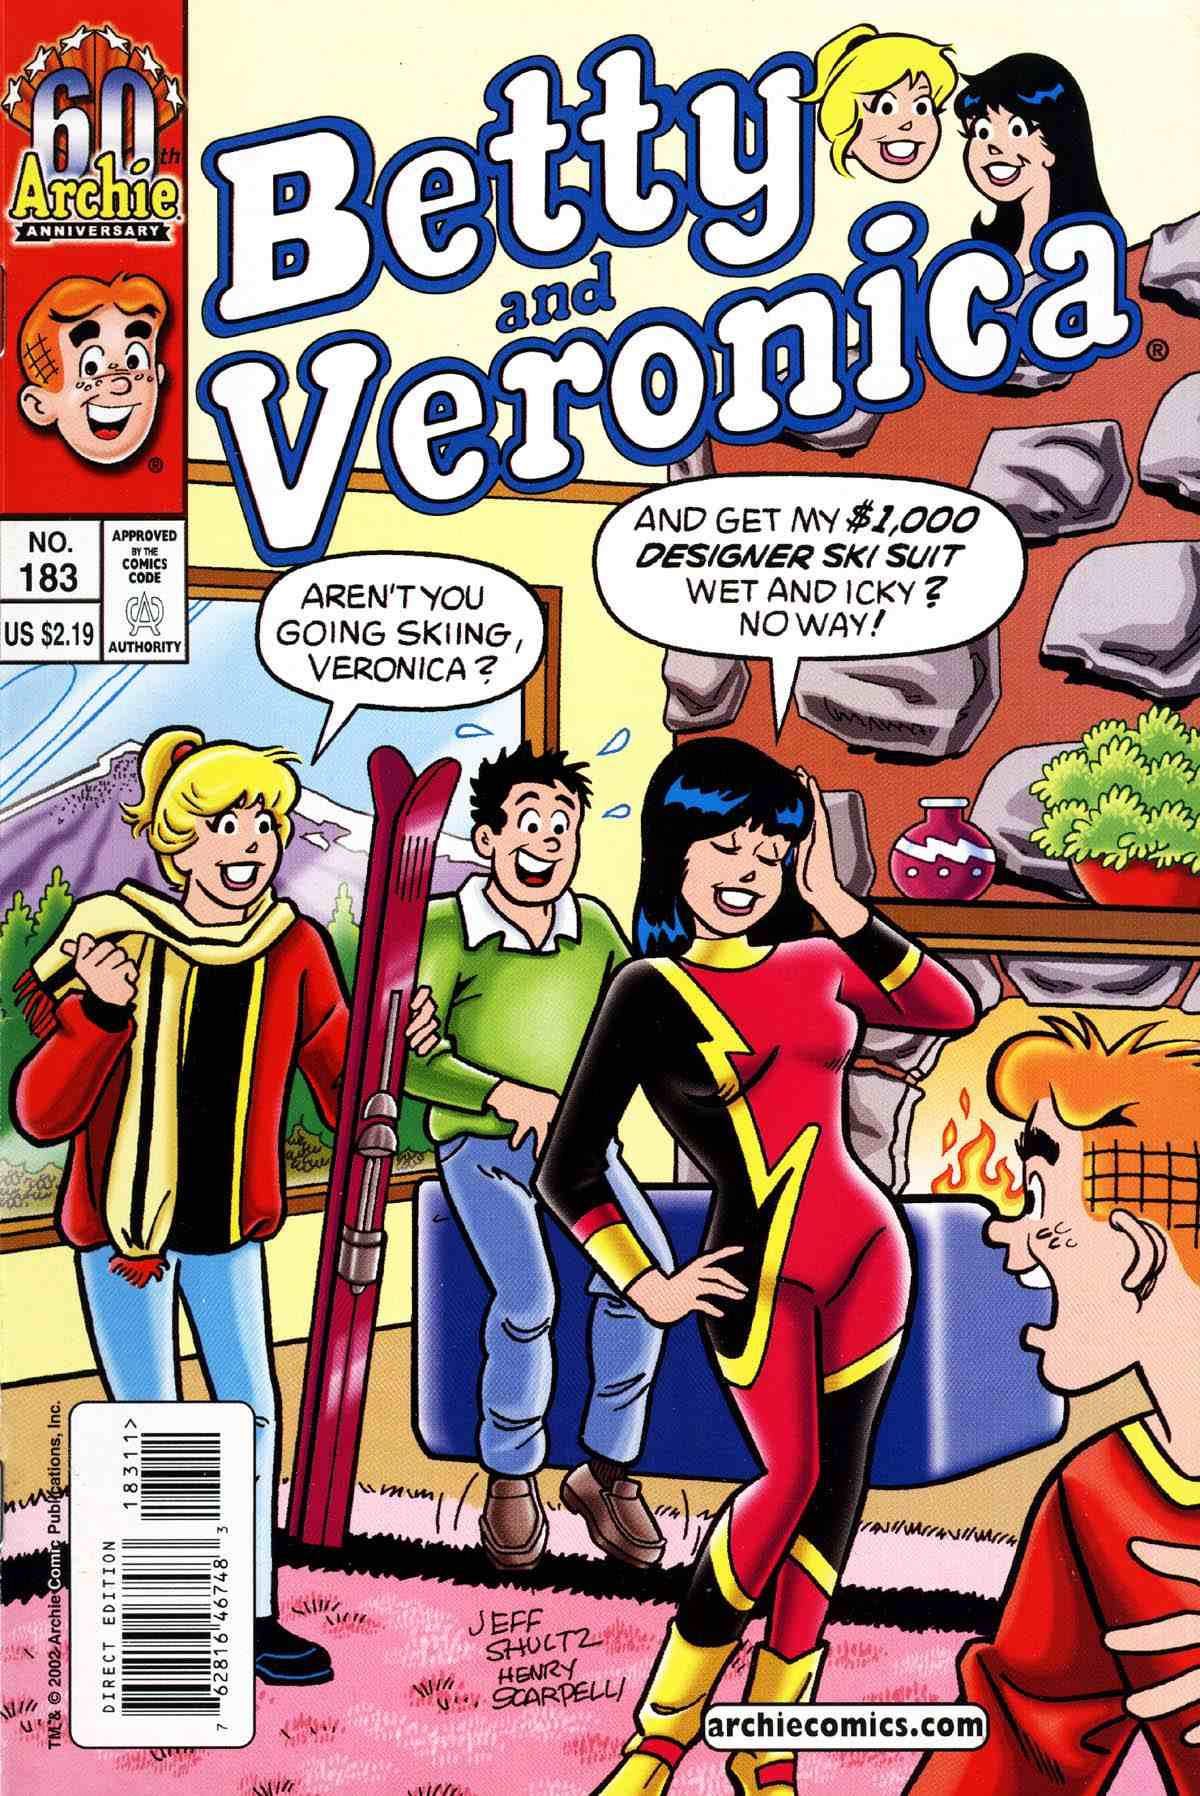 Read online Archie's Girls Betty and Veronica comic -  Issue #183 - 1